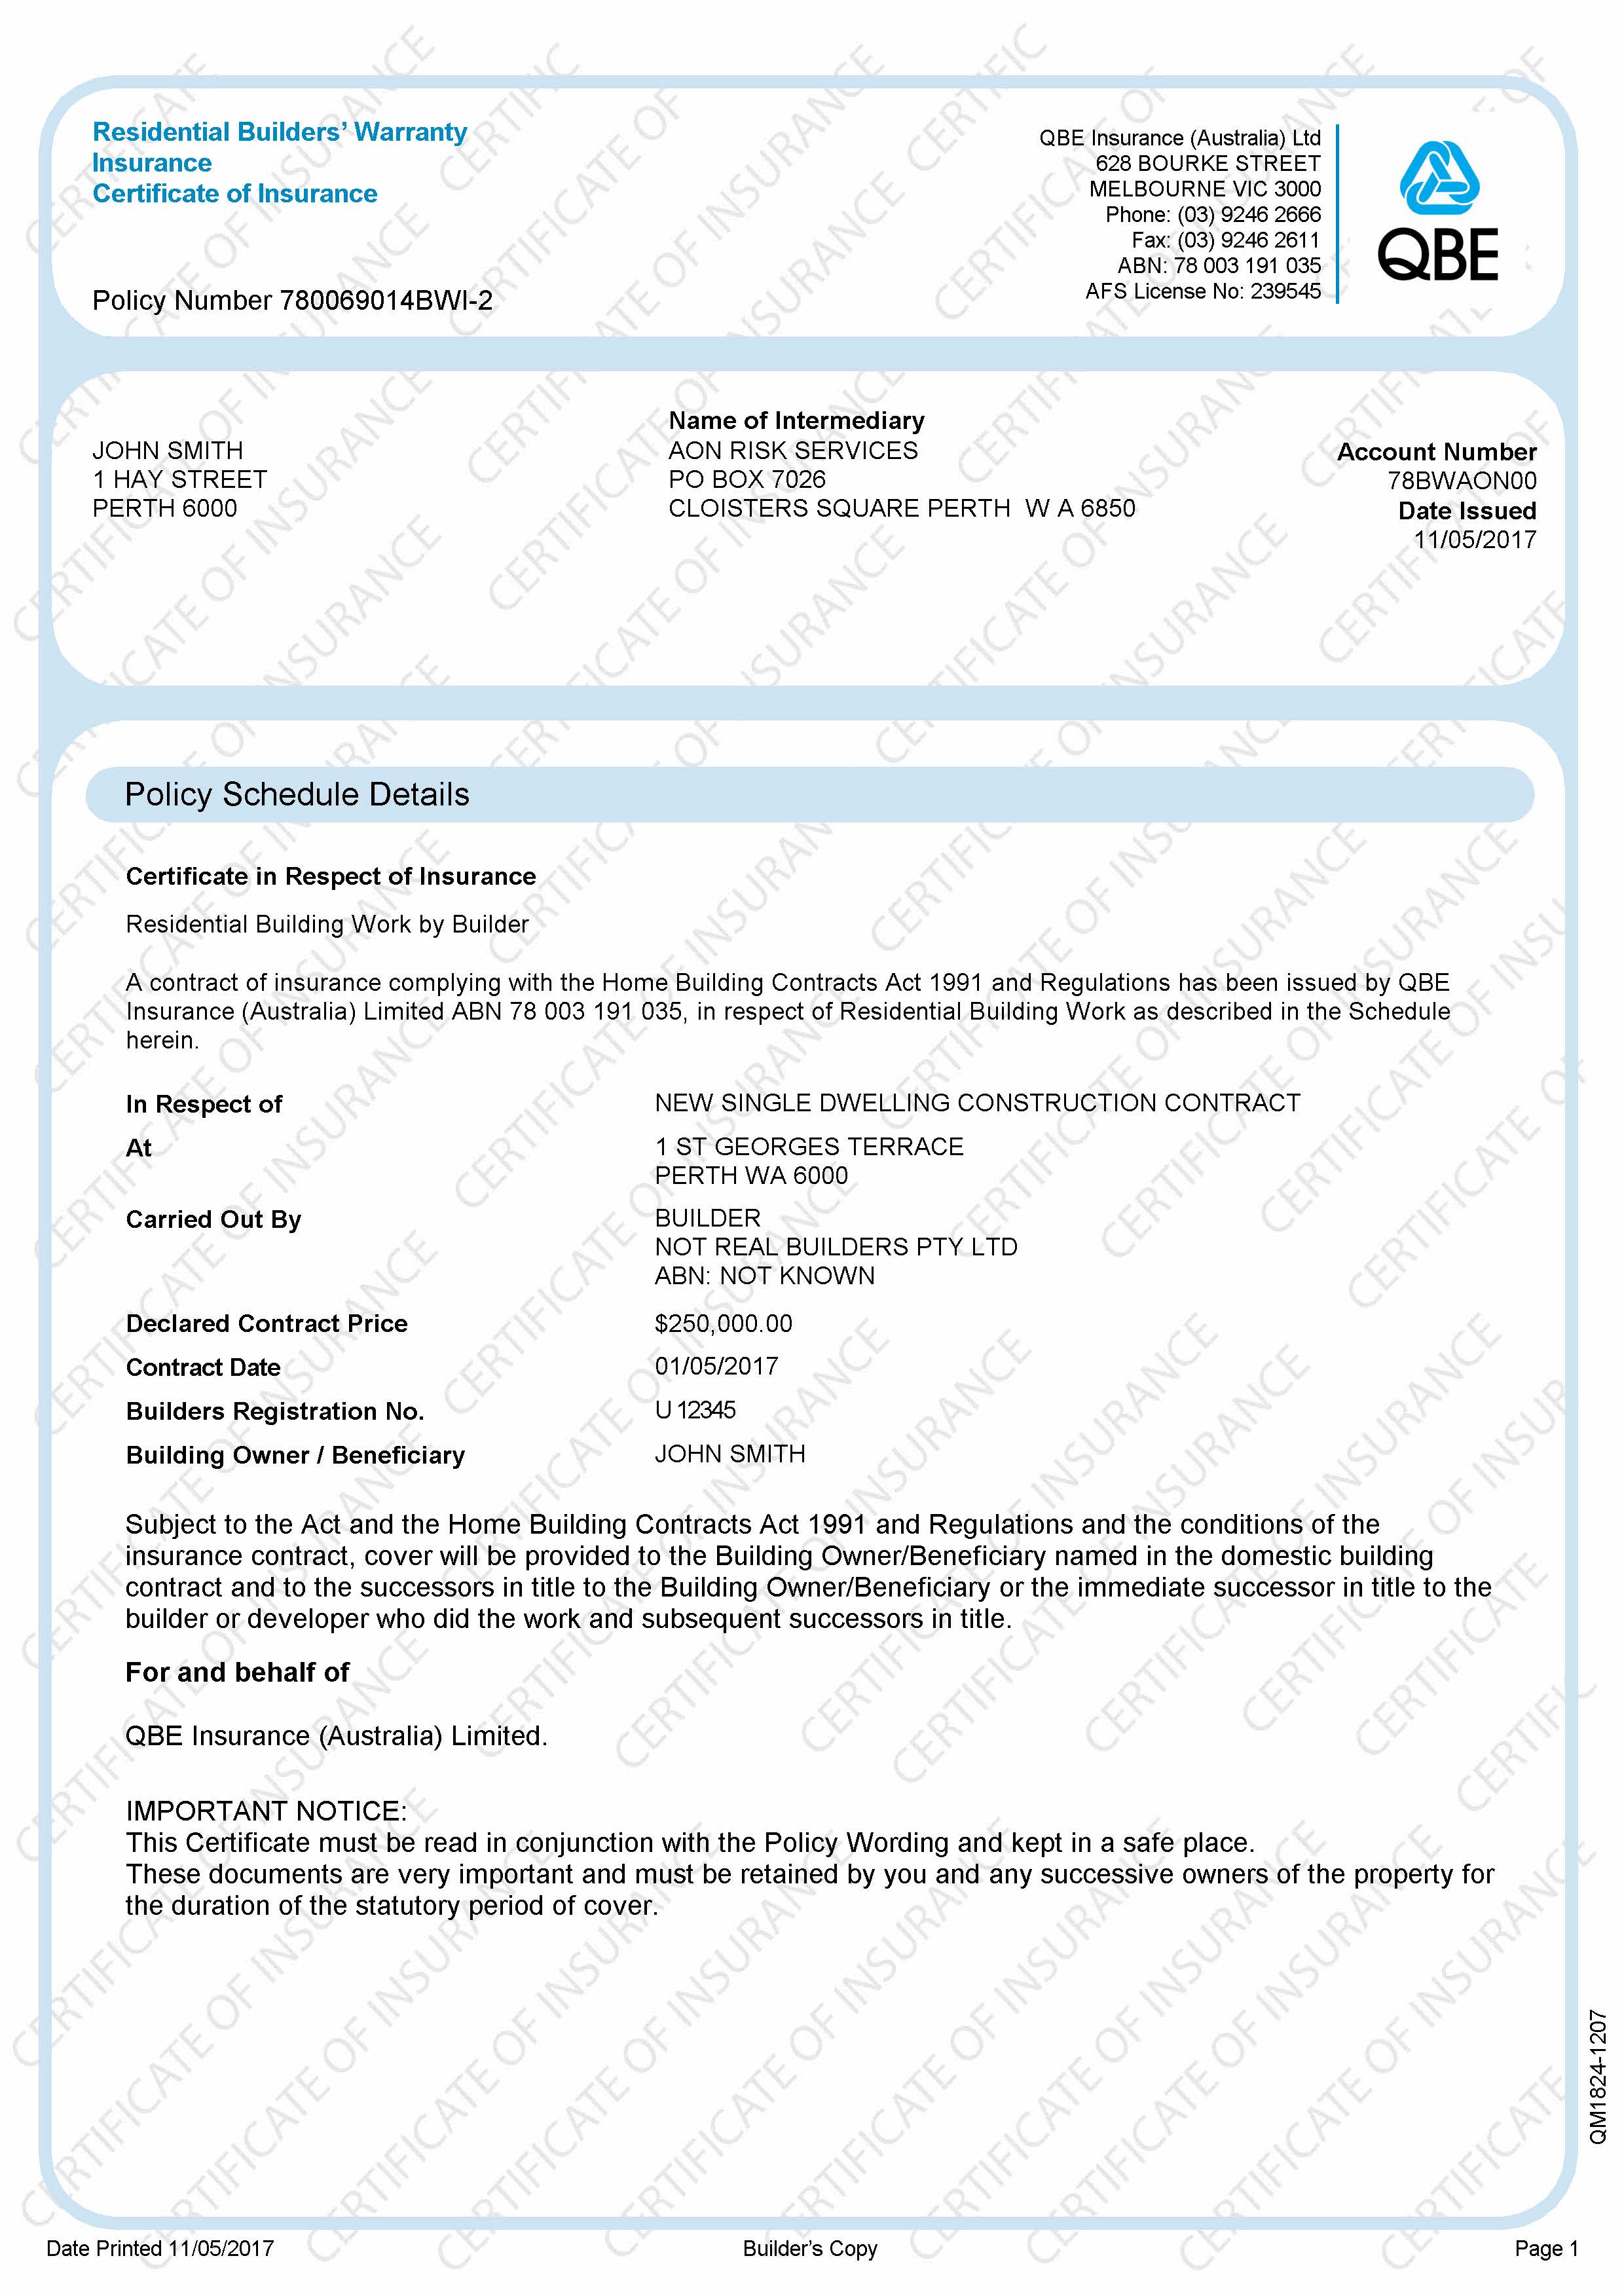 Home Indemnity Insurance "Certificate of insurance" example